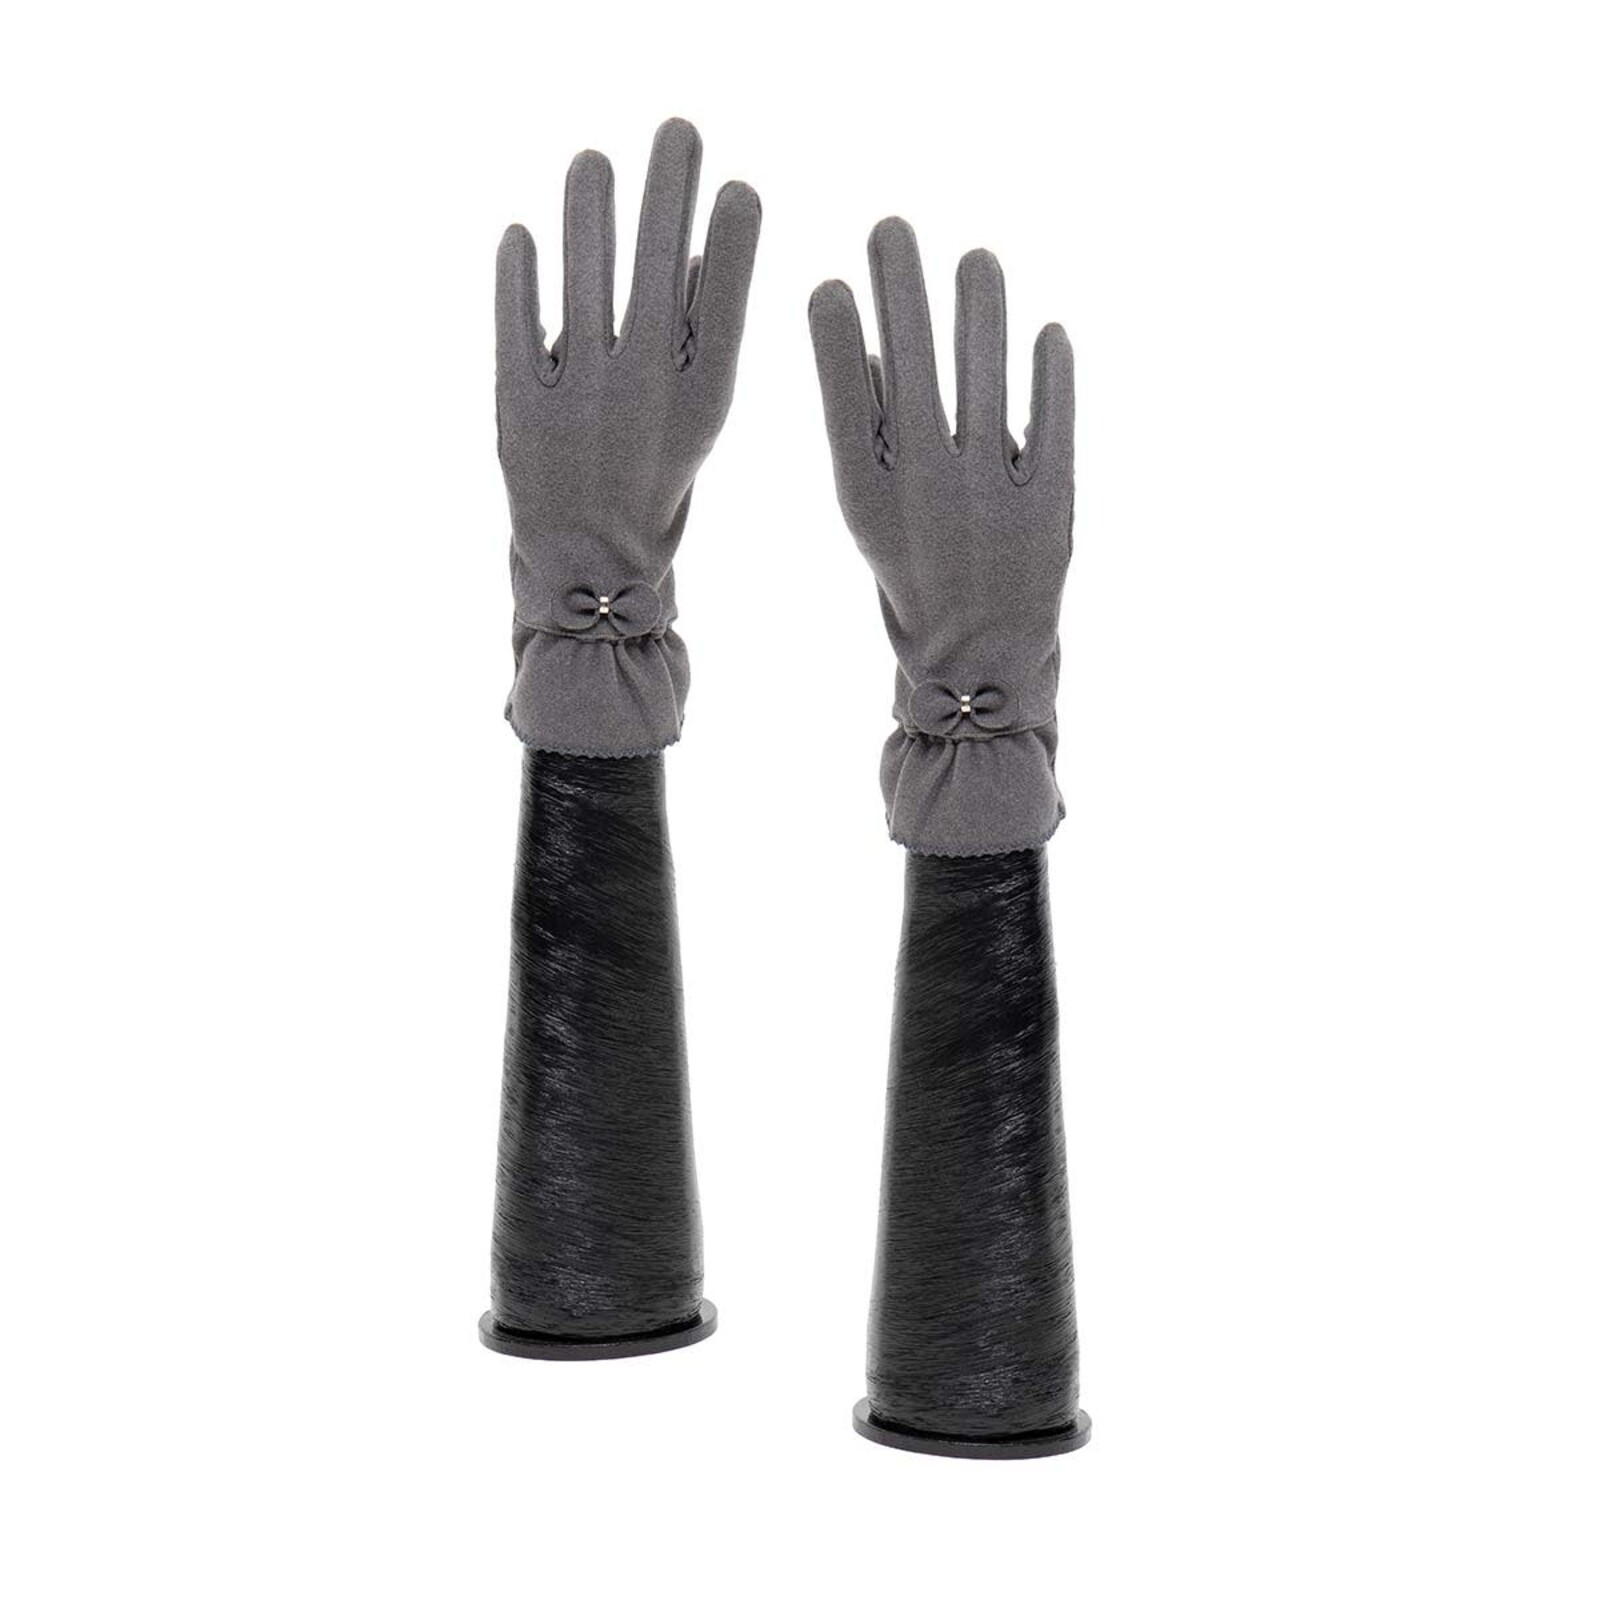 Trezo Grey Gloves with Bow and Ruffle  X8053 loading=